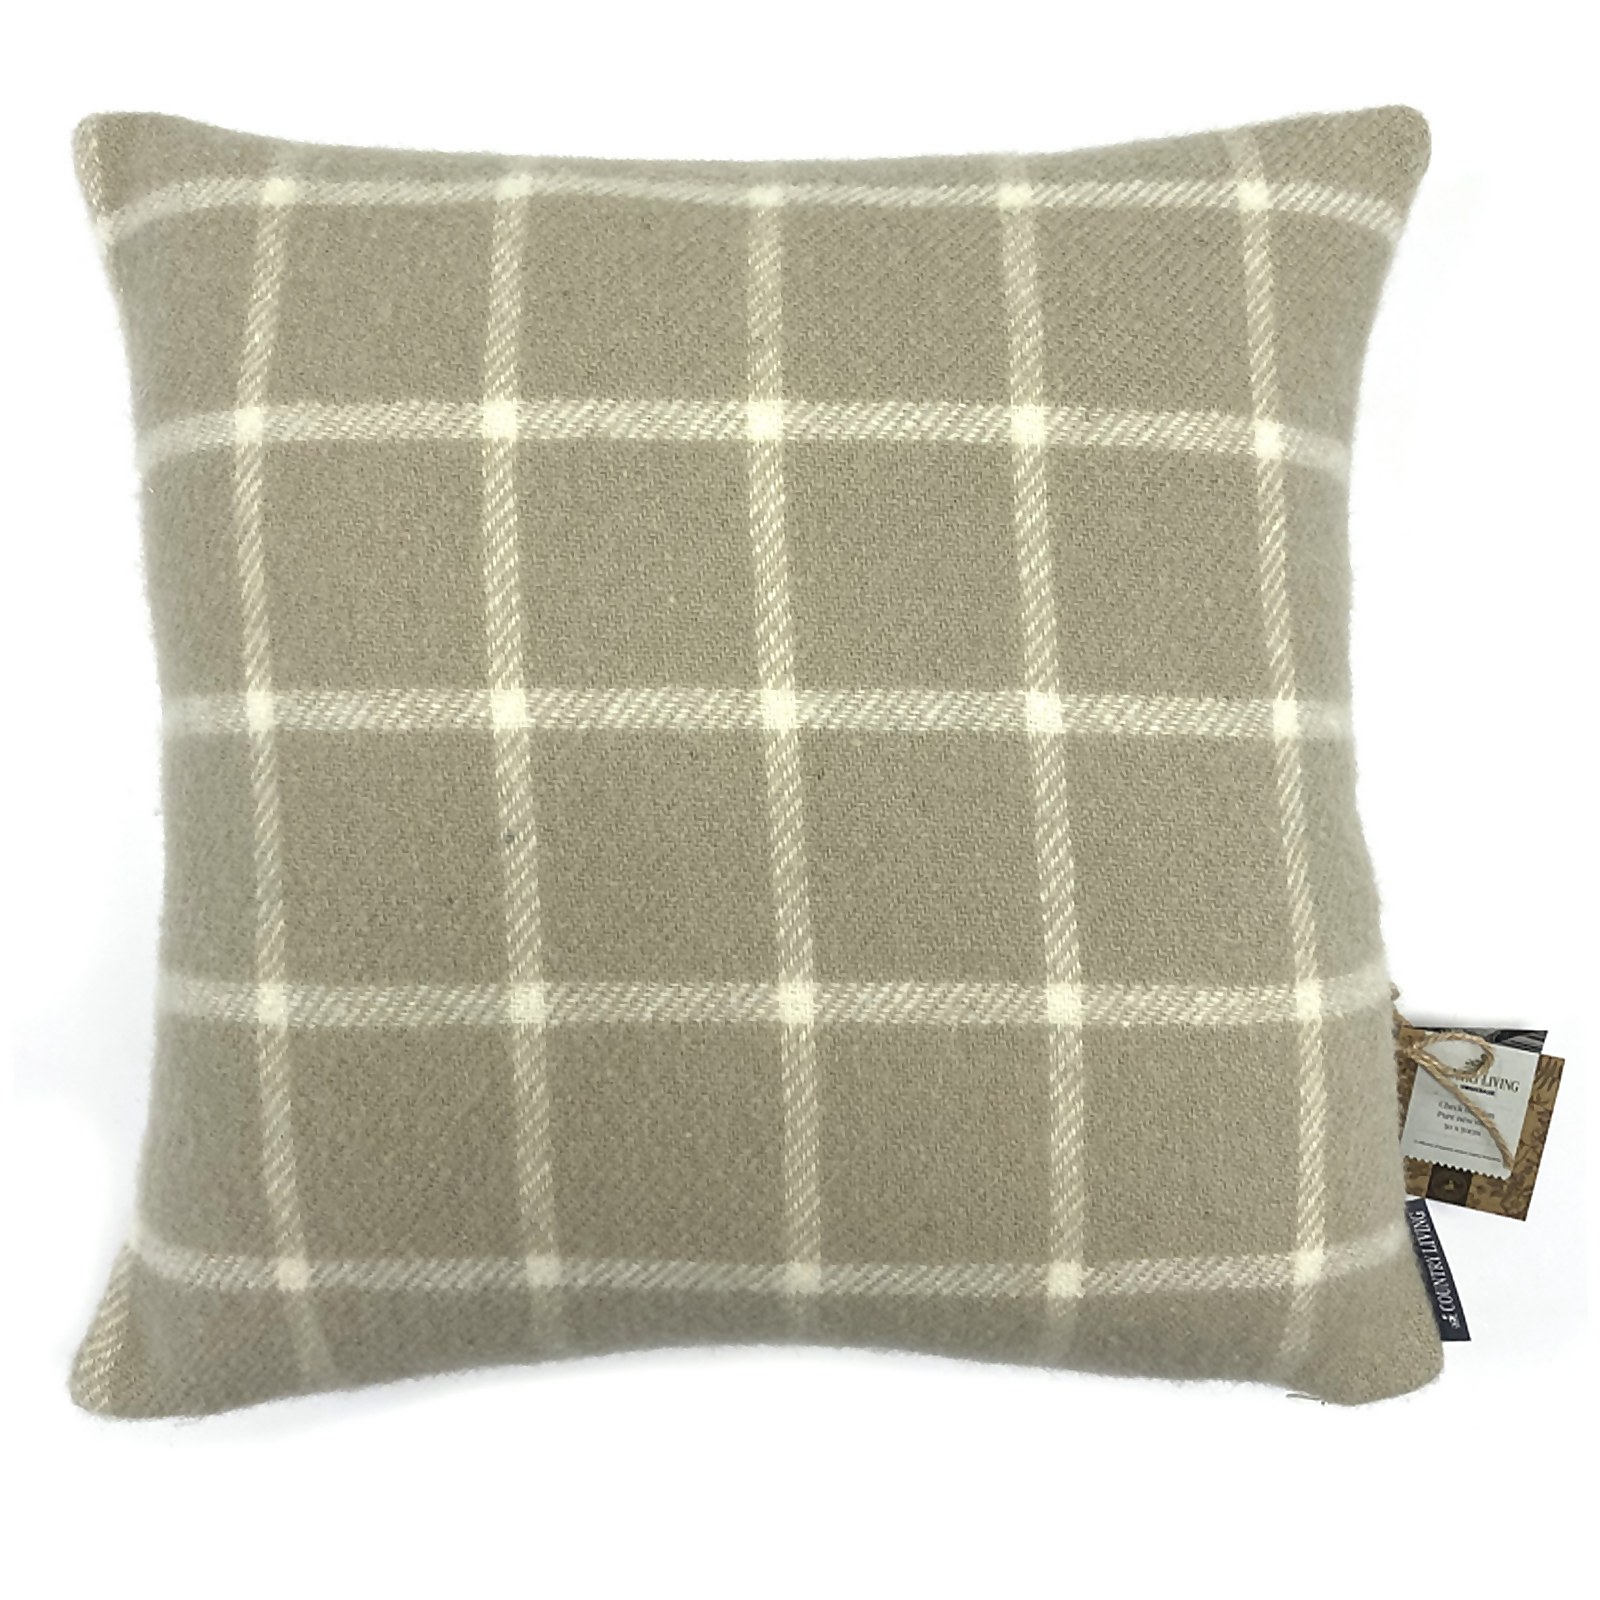 Photo of Country Living Wool Check Cushion - 50x50cm - Latte